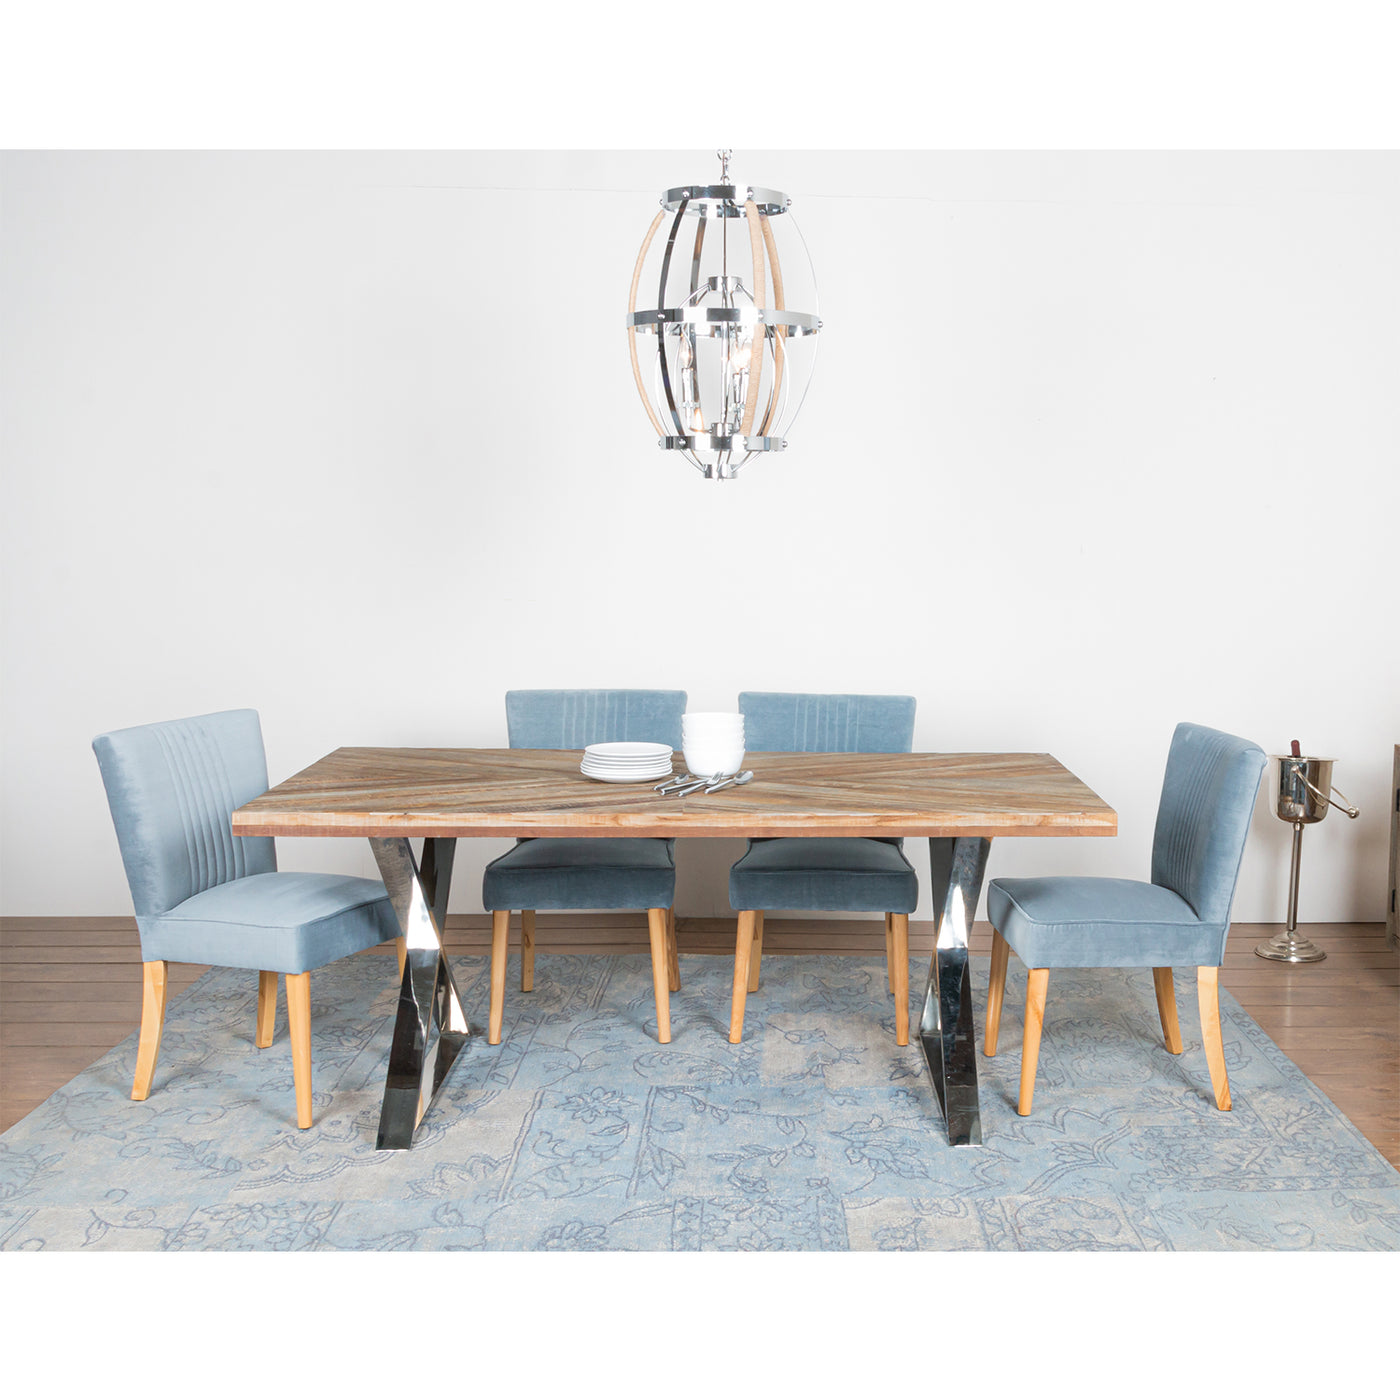 Matrix 6-Seat Dining Table in Natural Finish